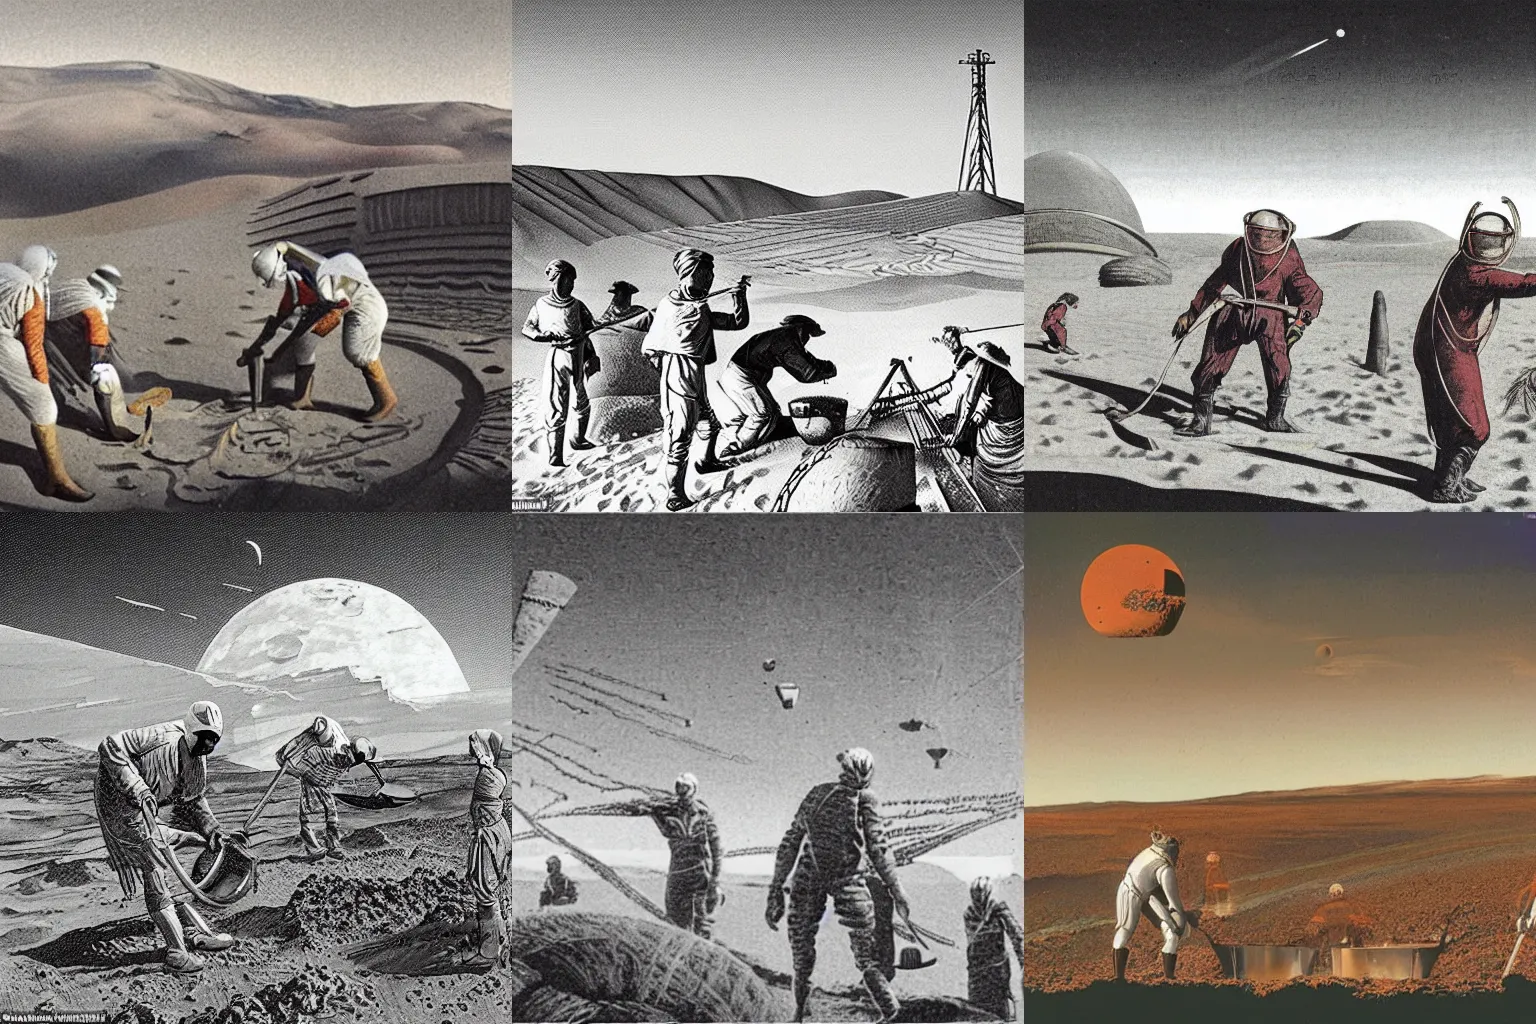 Prompt: An image in a magazine depicting farmers working on mars in traditional farmers outfits, 1920s speculative futurism, distant shot, some growing crops visible amongst sand